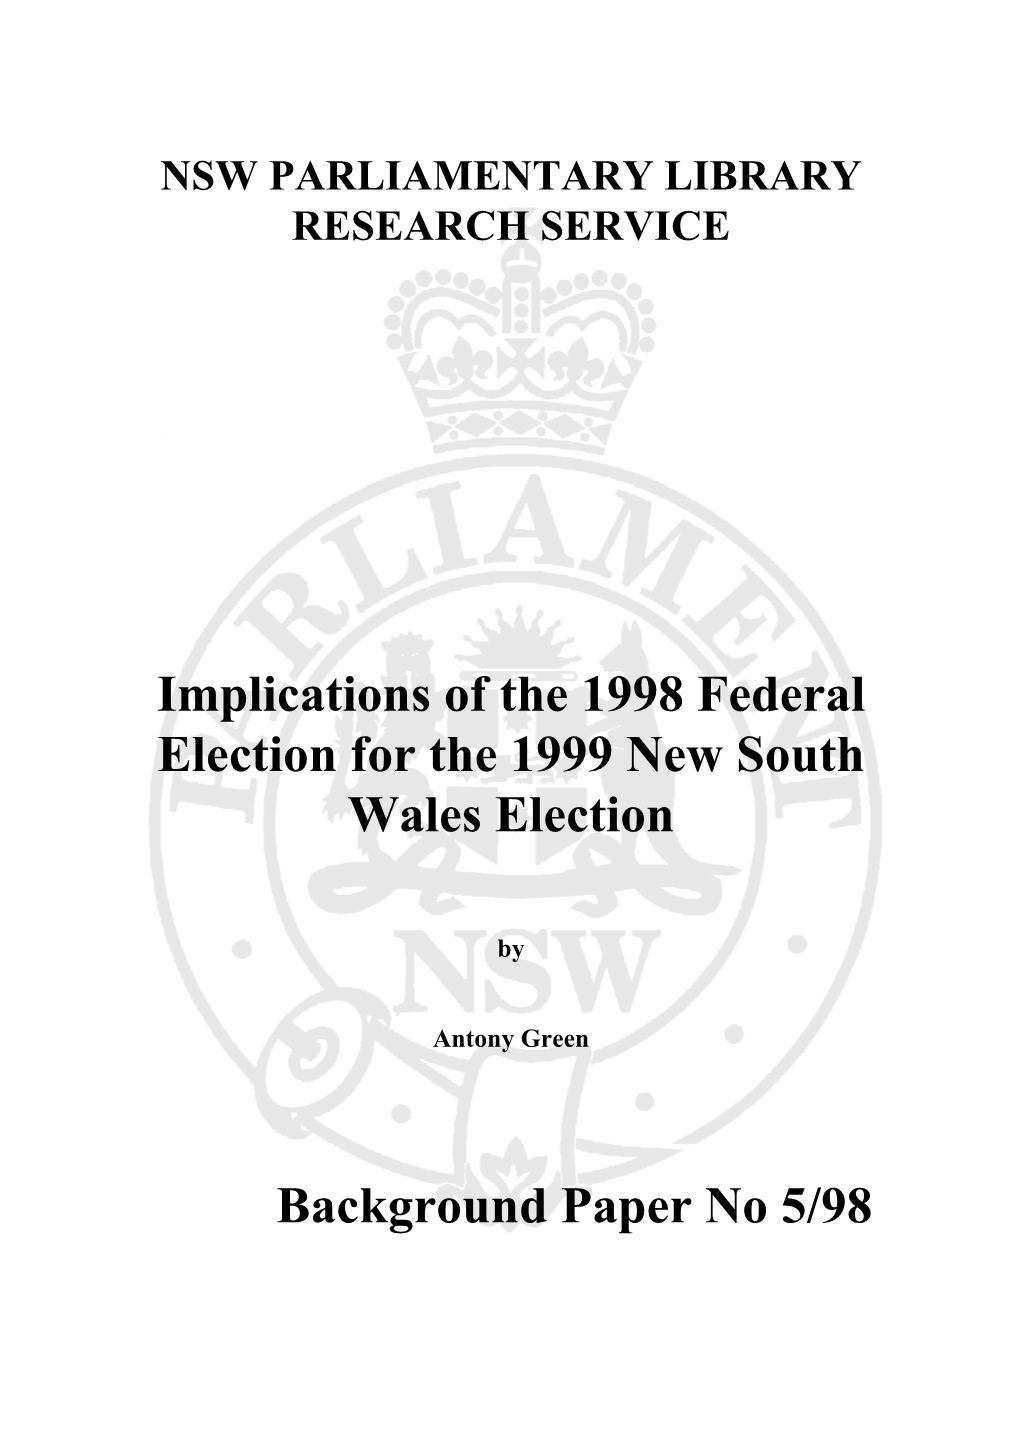 Implications of the 1998 Federal Election for the 1999 New South Wales Election